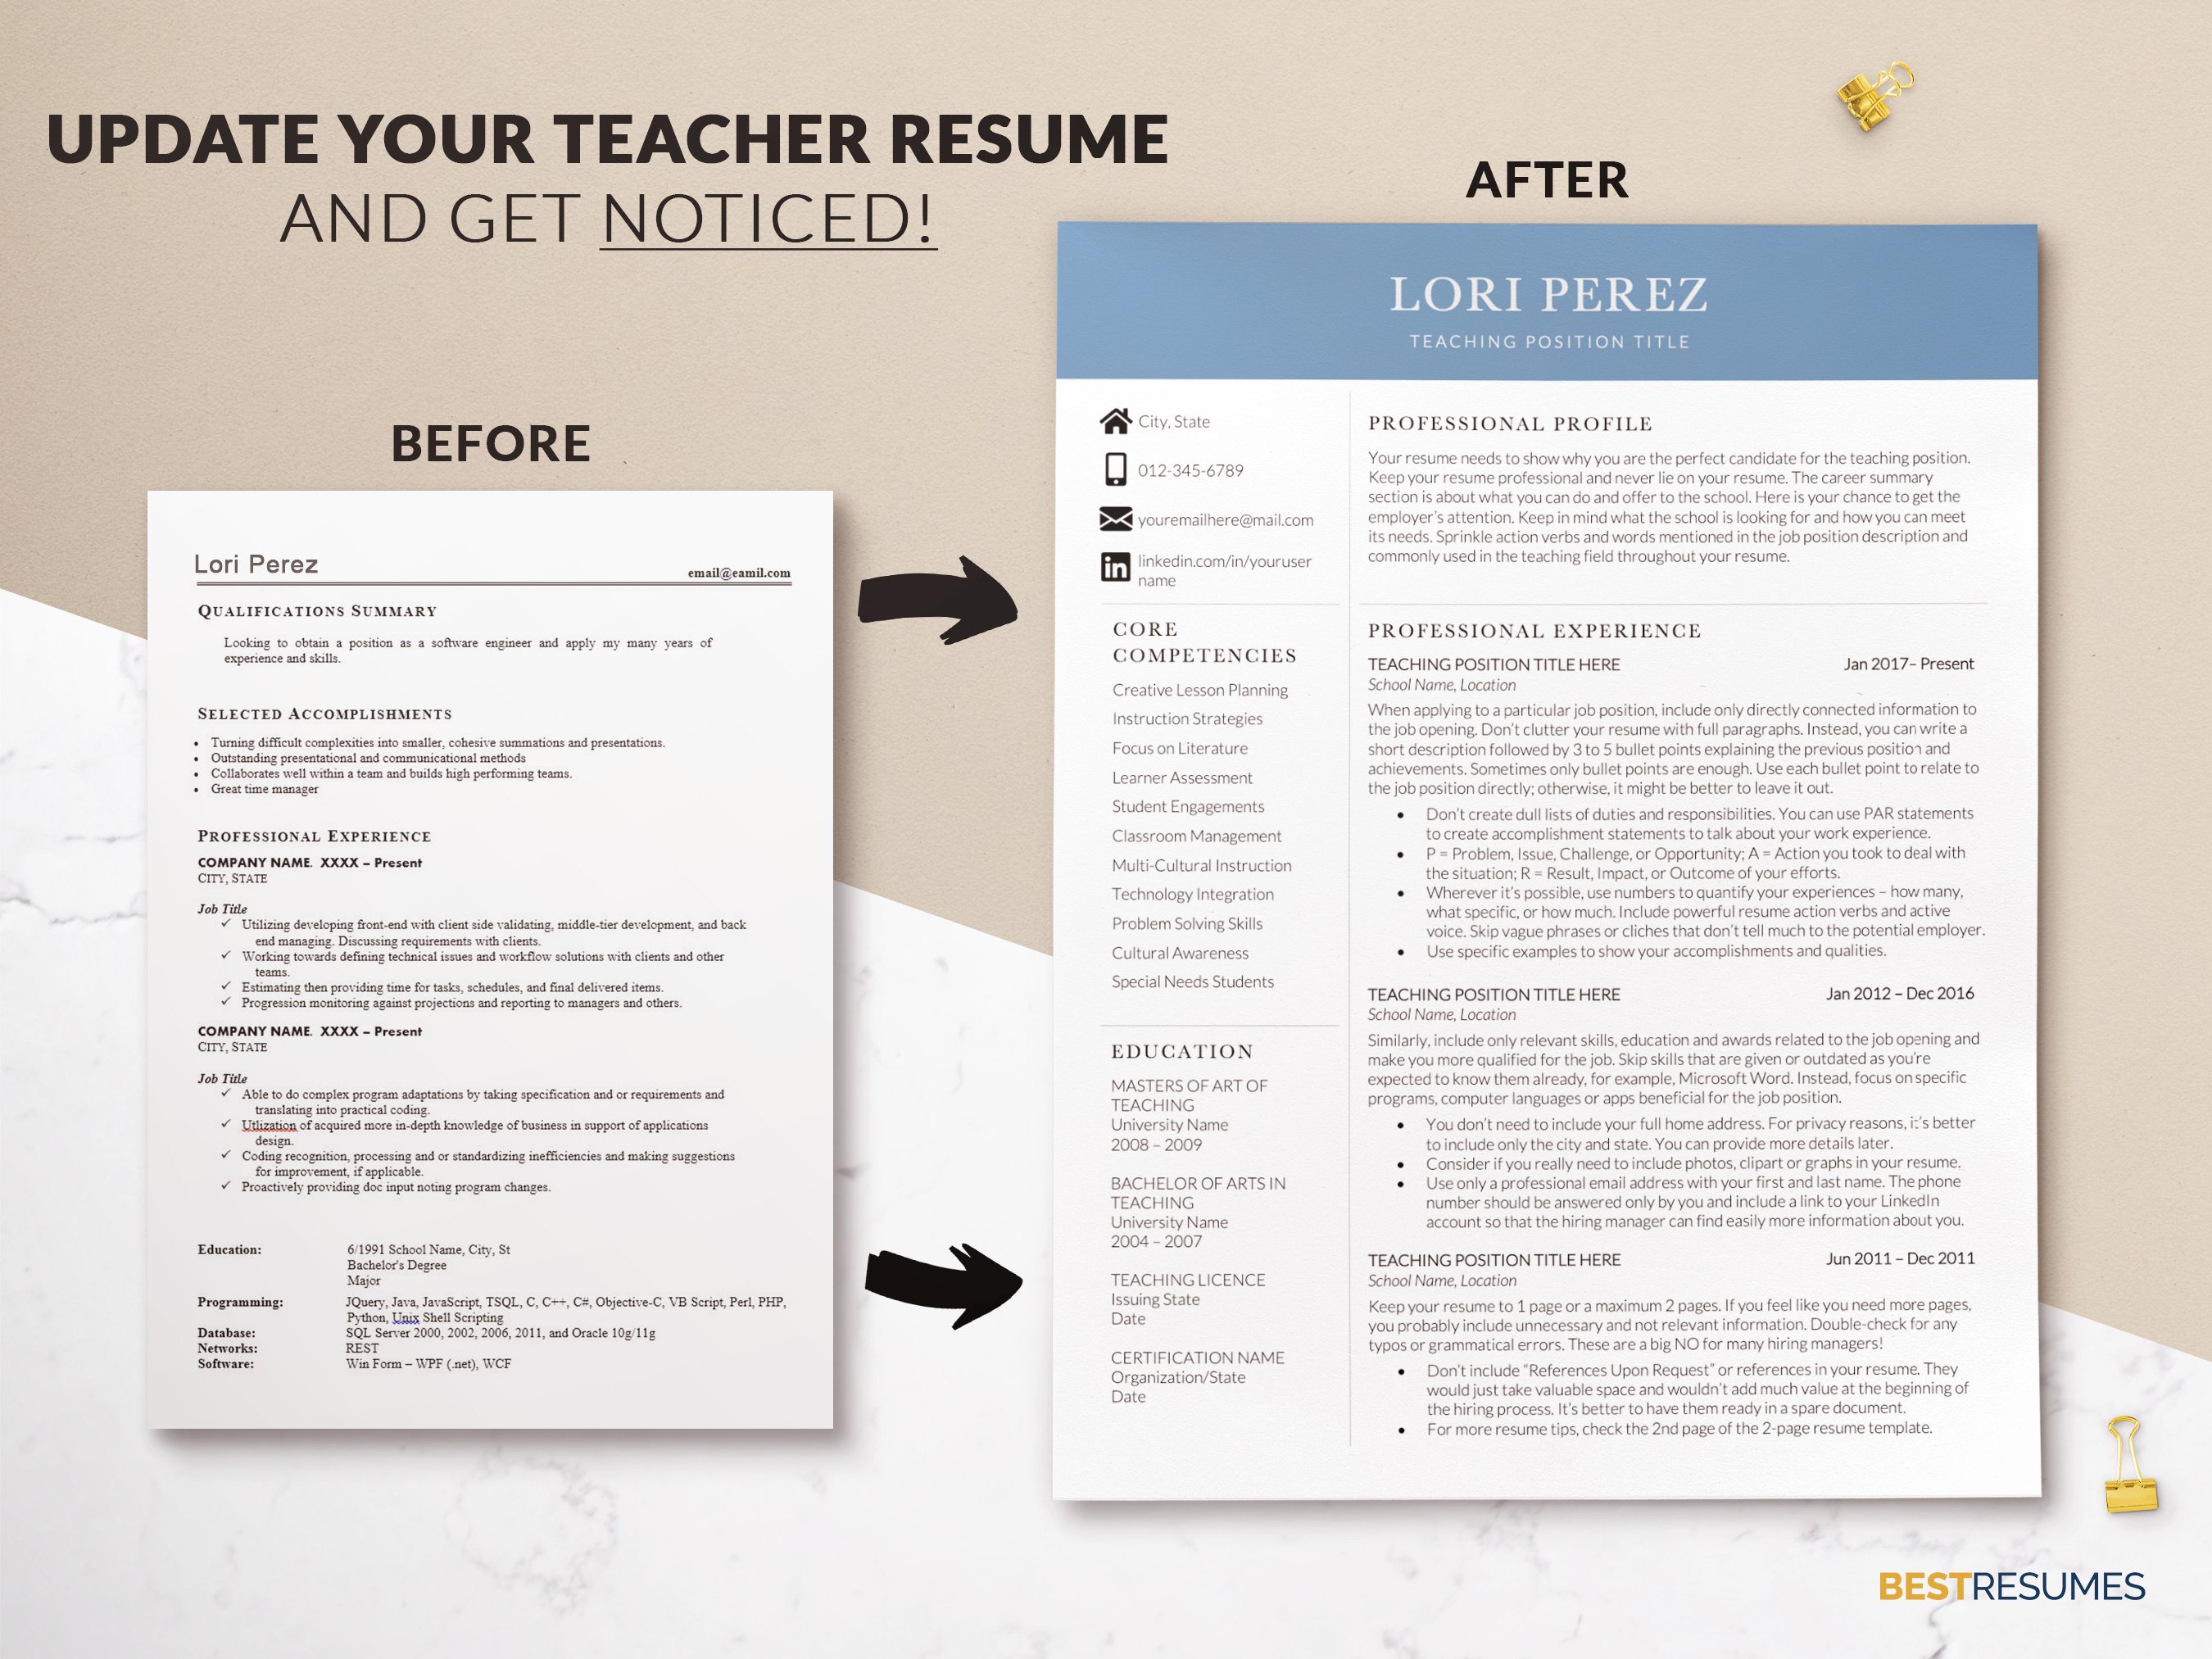 professional teaching resume and cover letter update your teacher resume lori perez 799